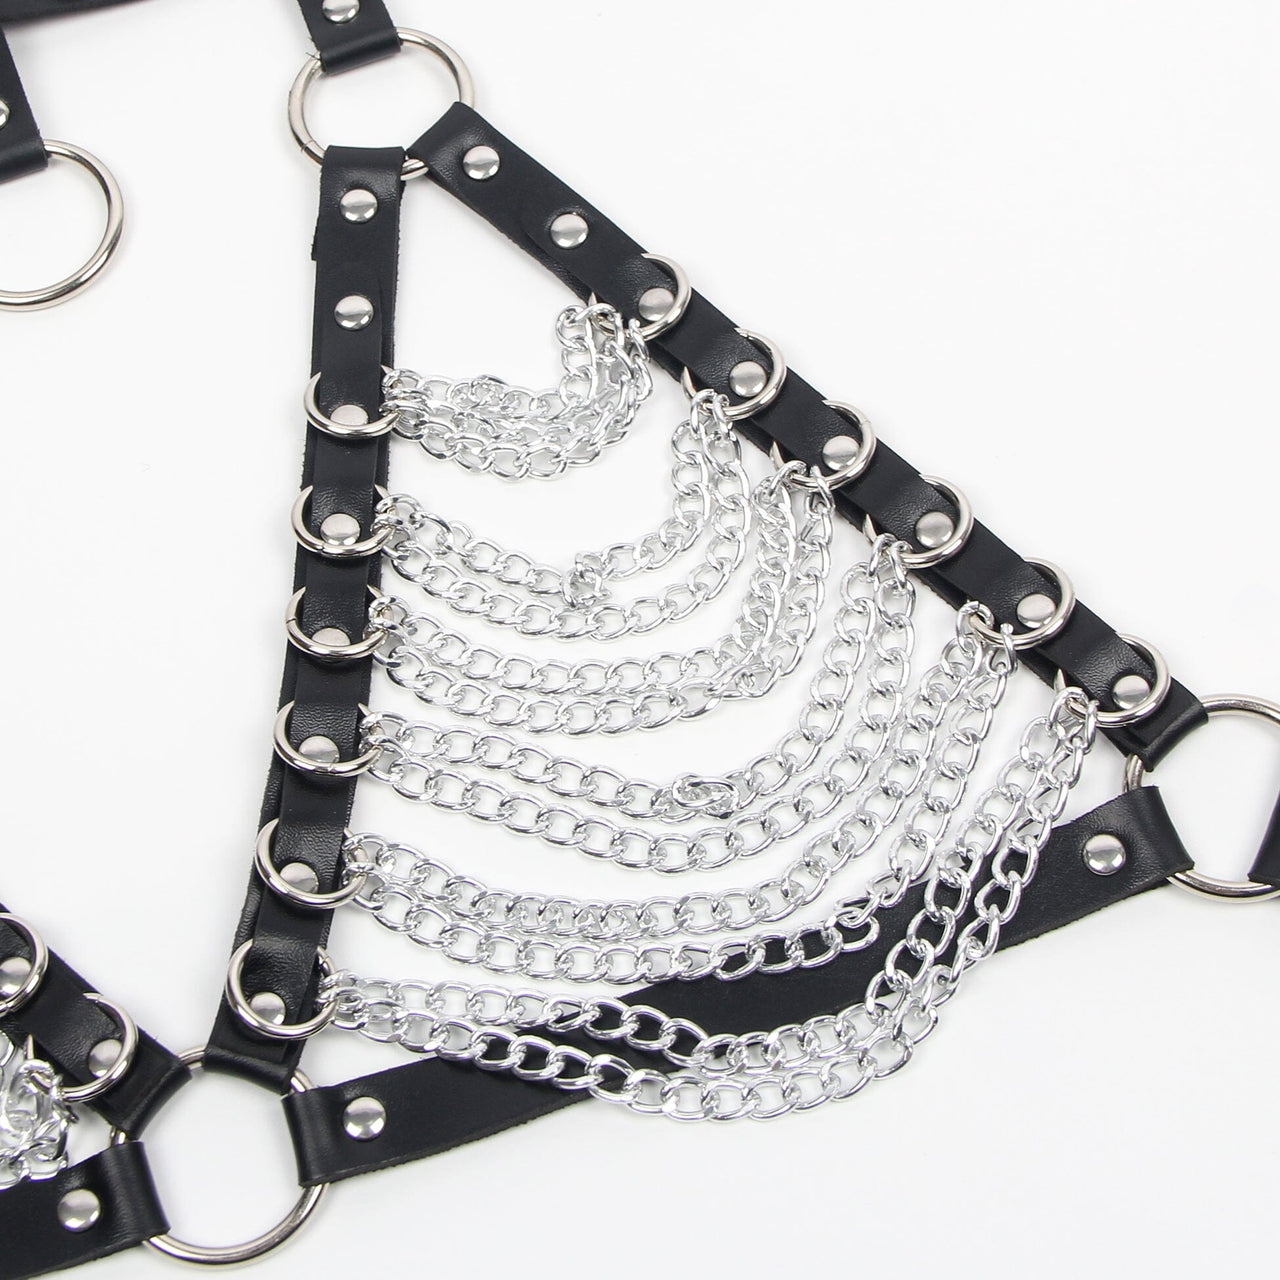 a black leather harness with chains and chains on it